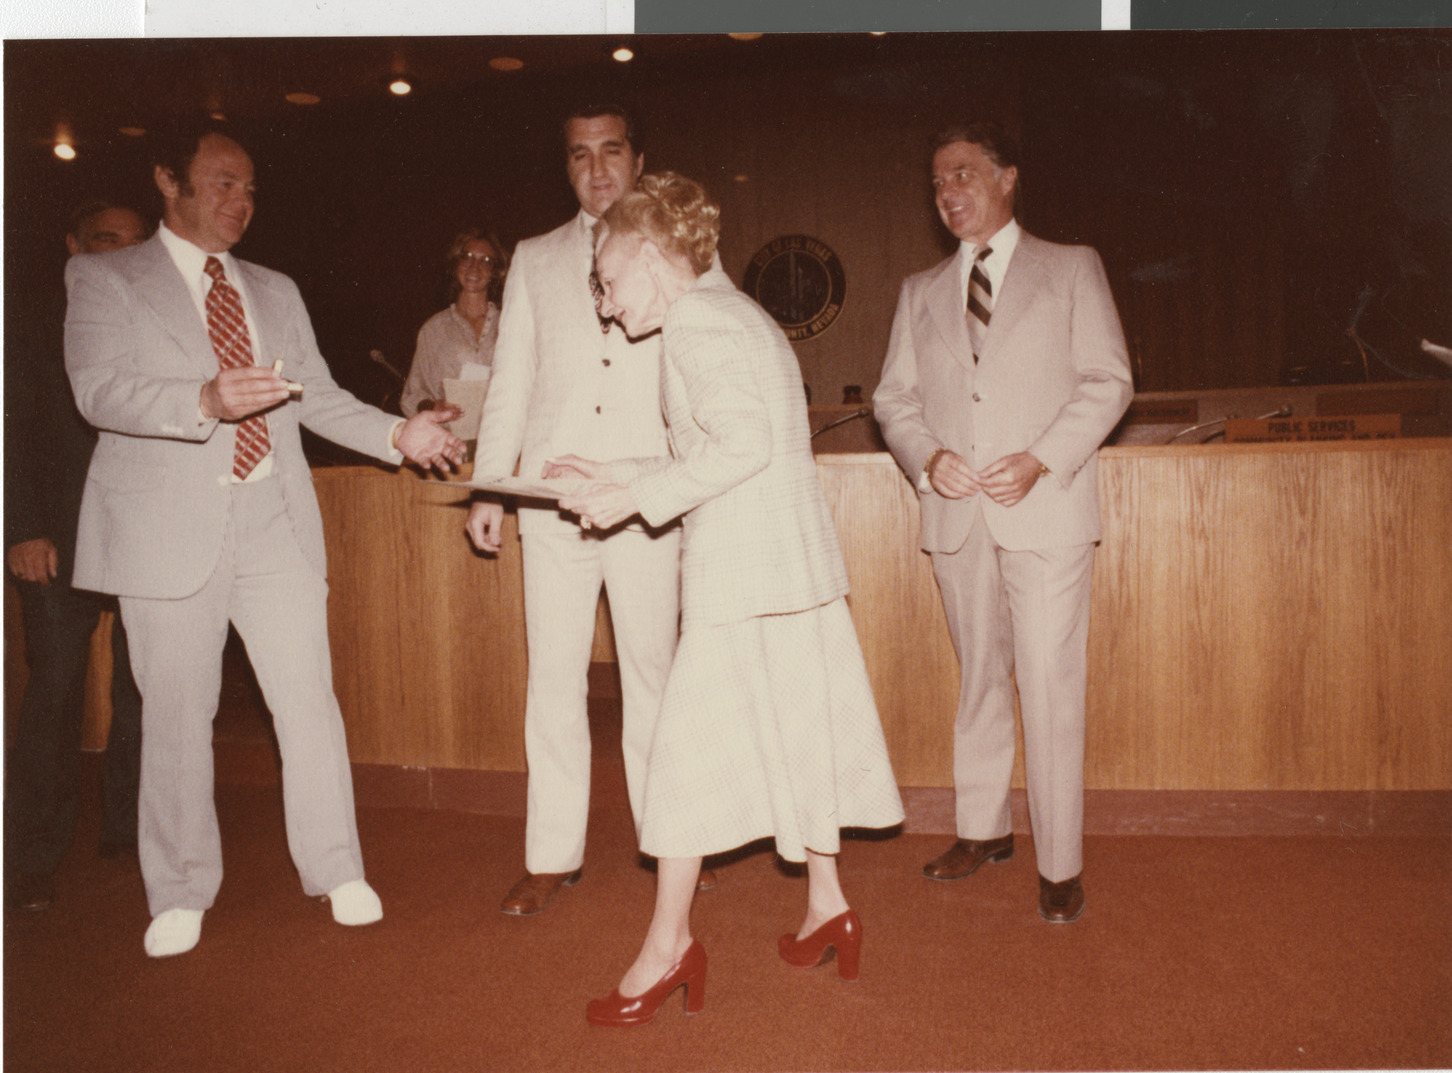 Photograph of Ron Lurie presenting certificate, circa 1978